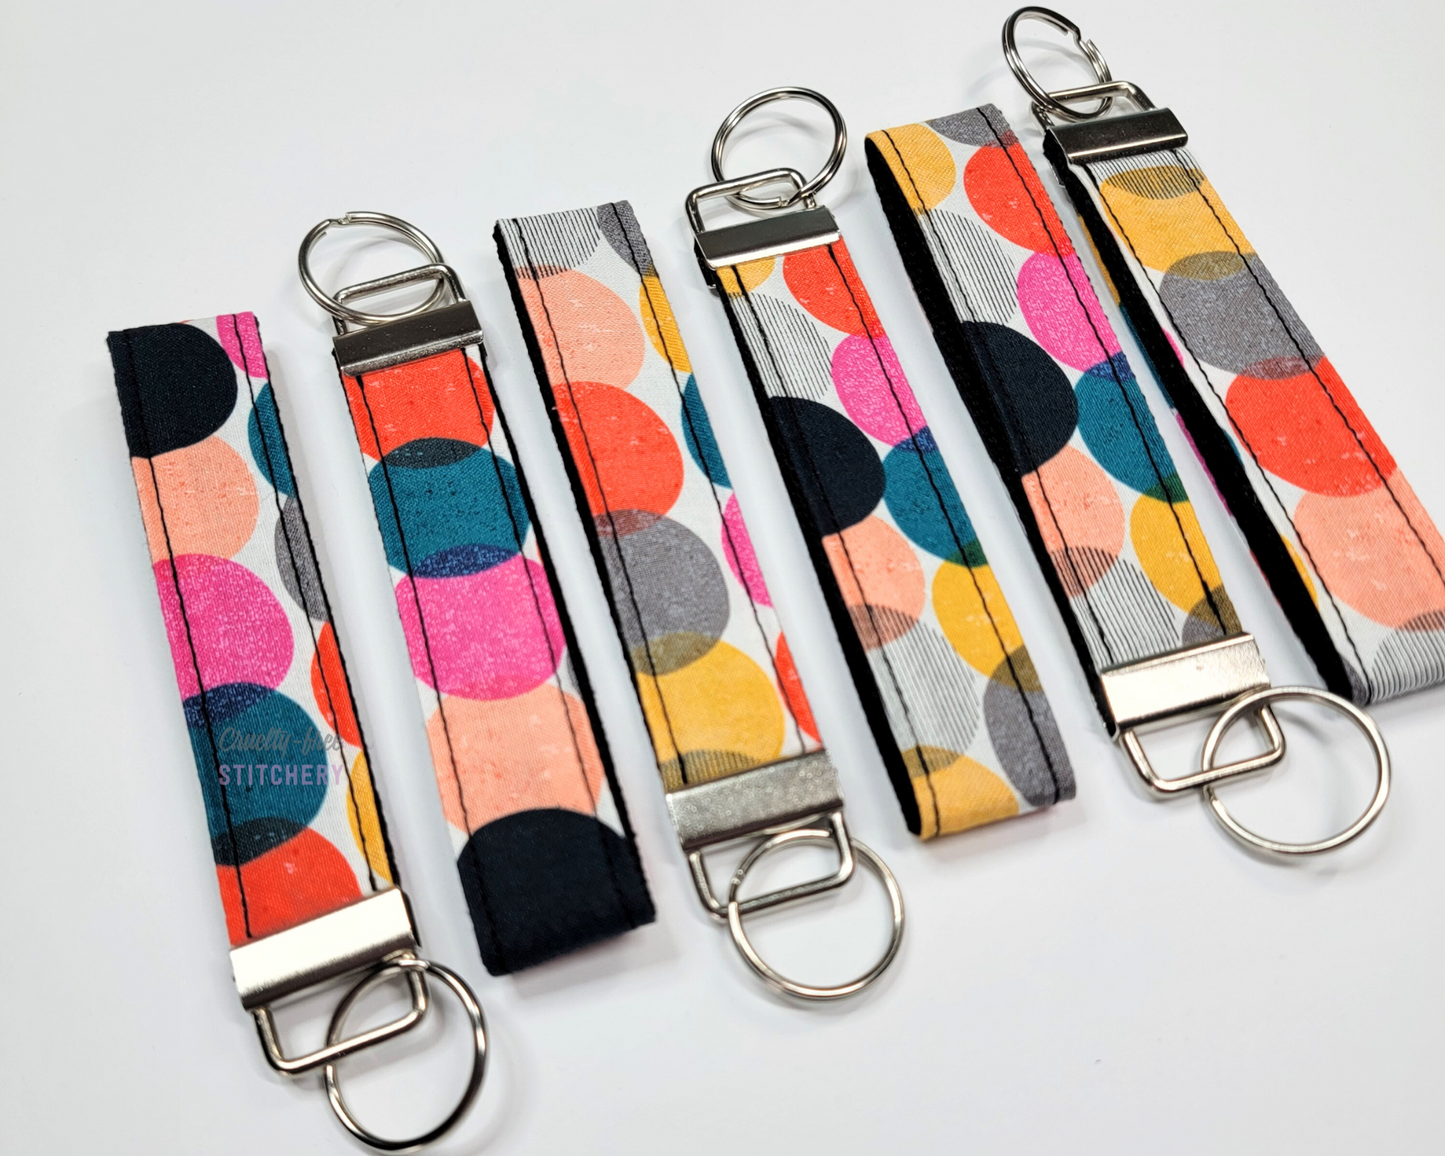 Wristlet key fobs arranged in a row of six with ends alternating. The wristlet is fabric with large multicolored dots - teal, hot pink, yellow, orange, black. The hardware and key ring are silver.